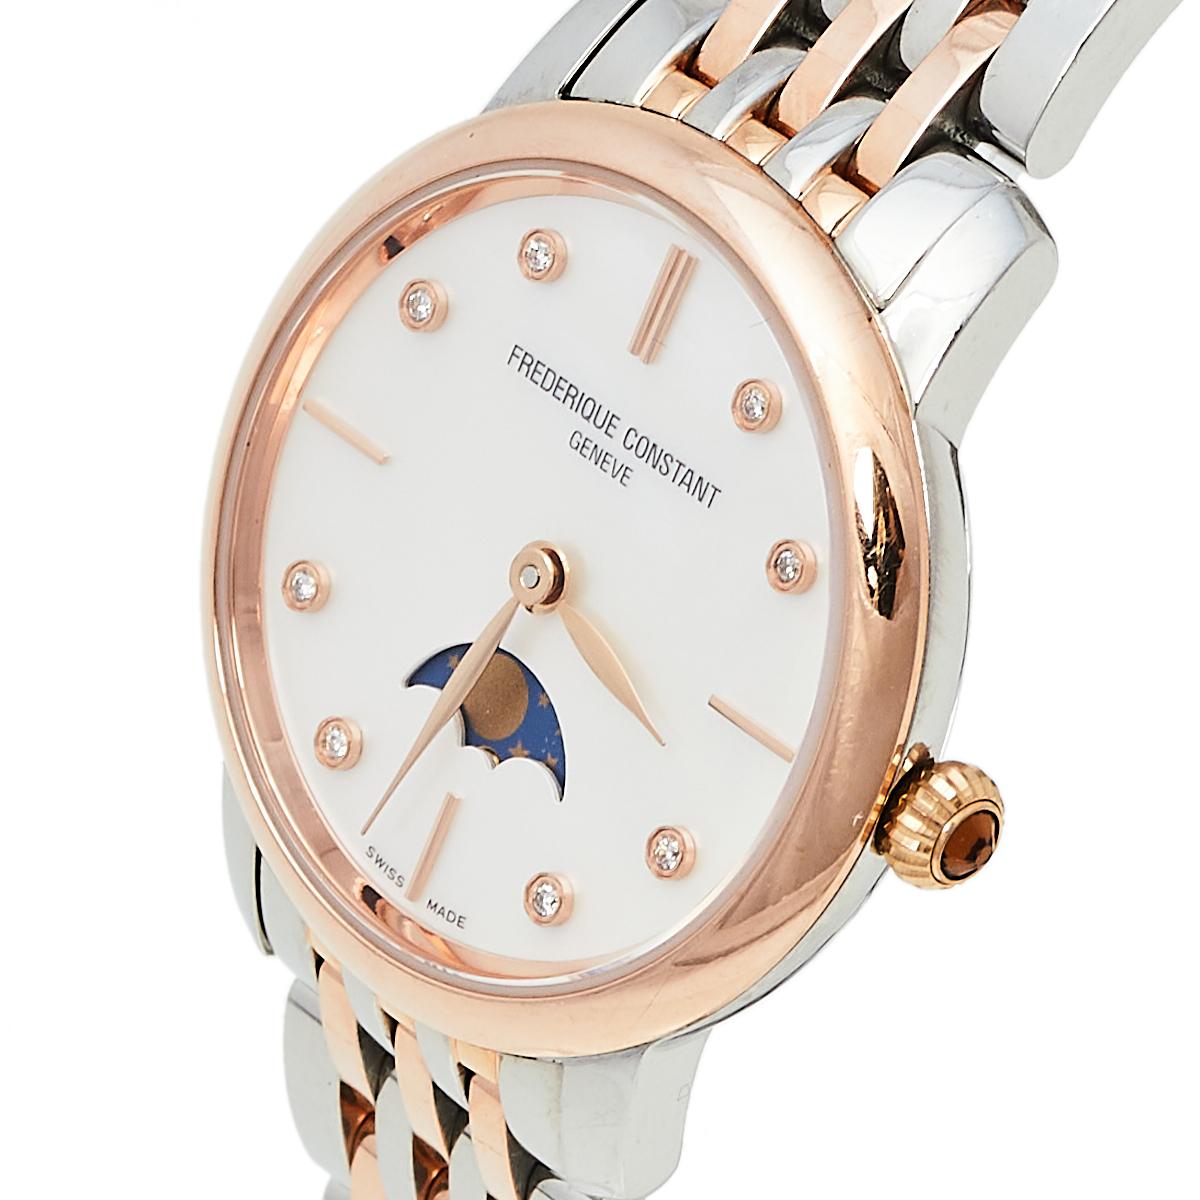 Frederique Constant Mother Two-Tone Stainless Steel Women's Wristwatch 30 mm 1